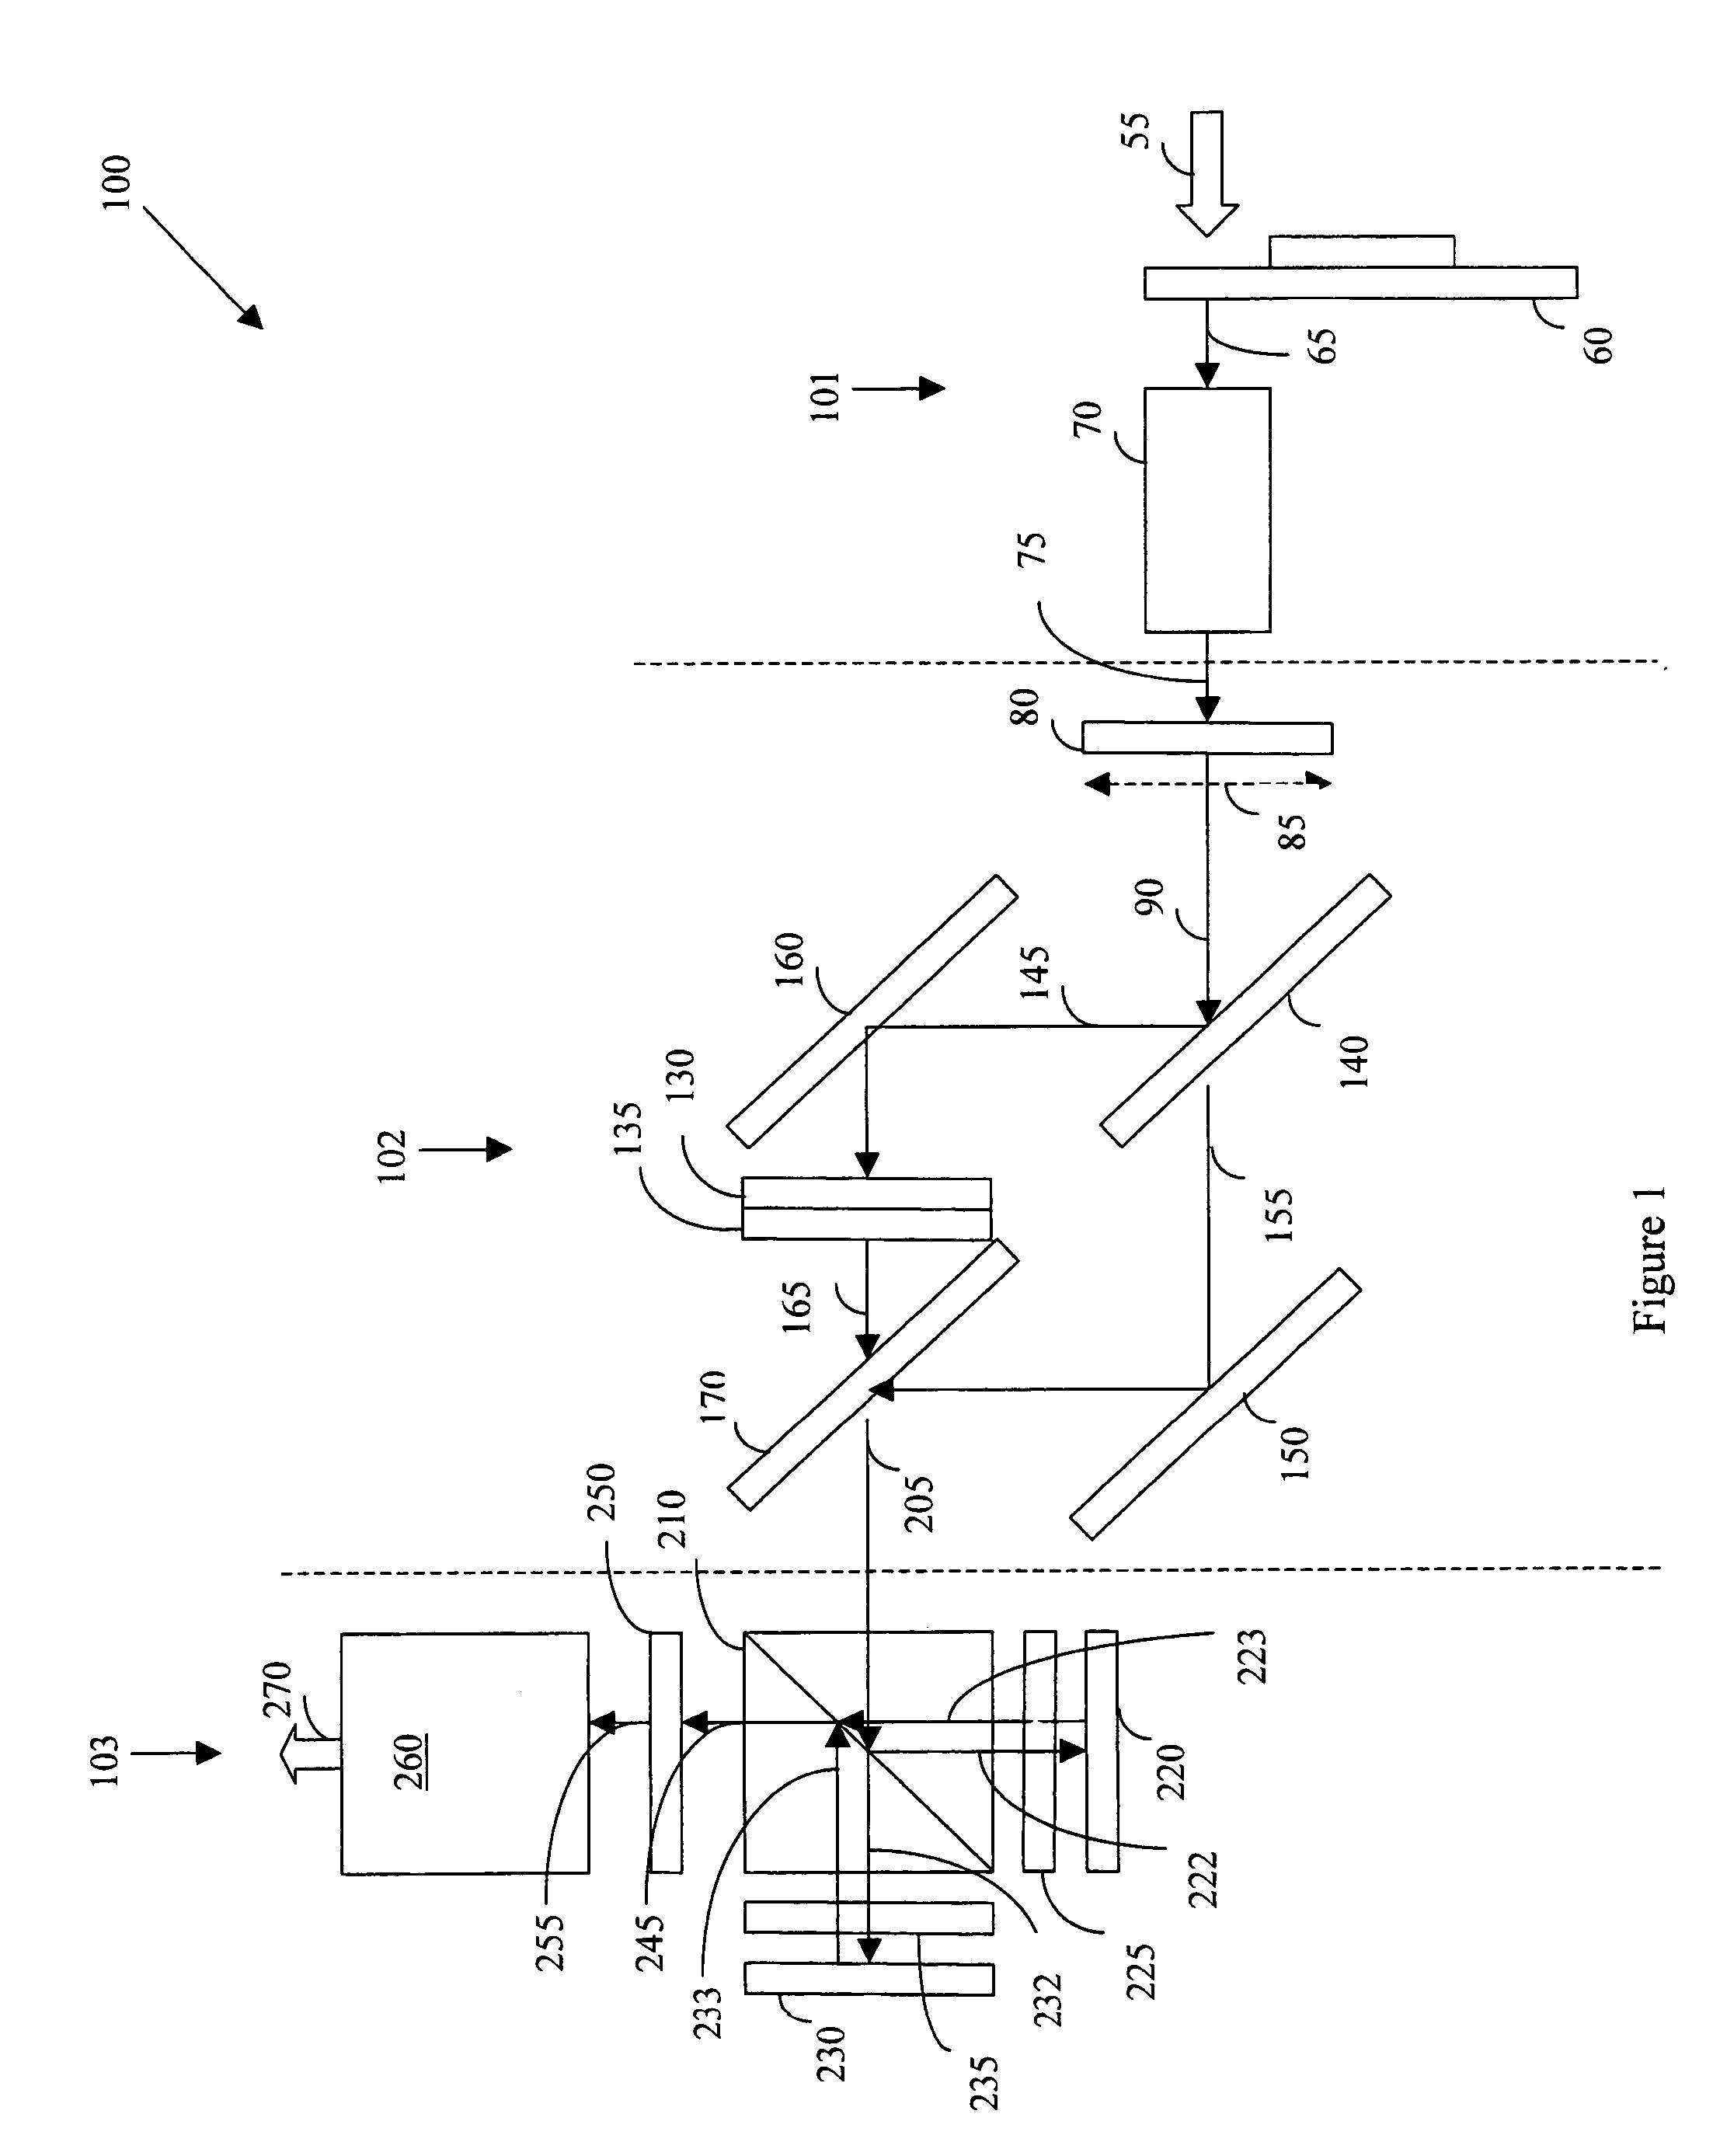 Two panel optical engine for projection applications